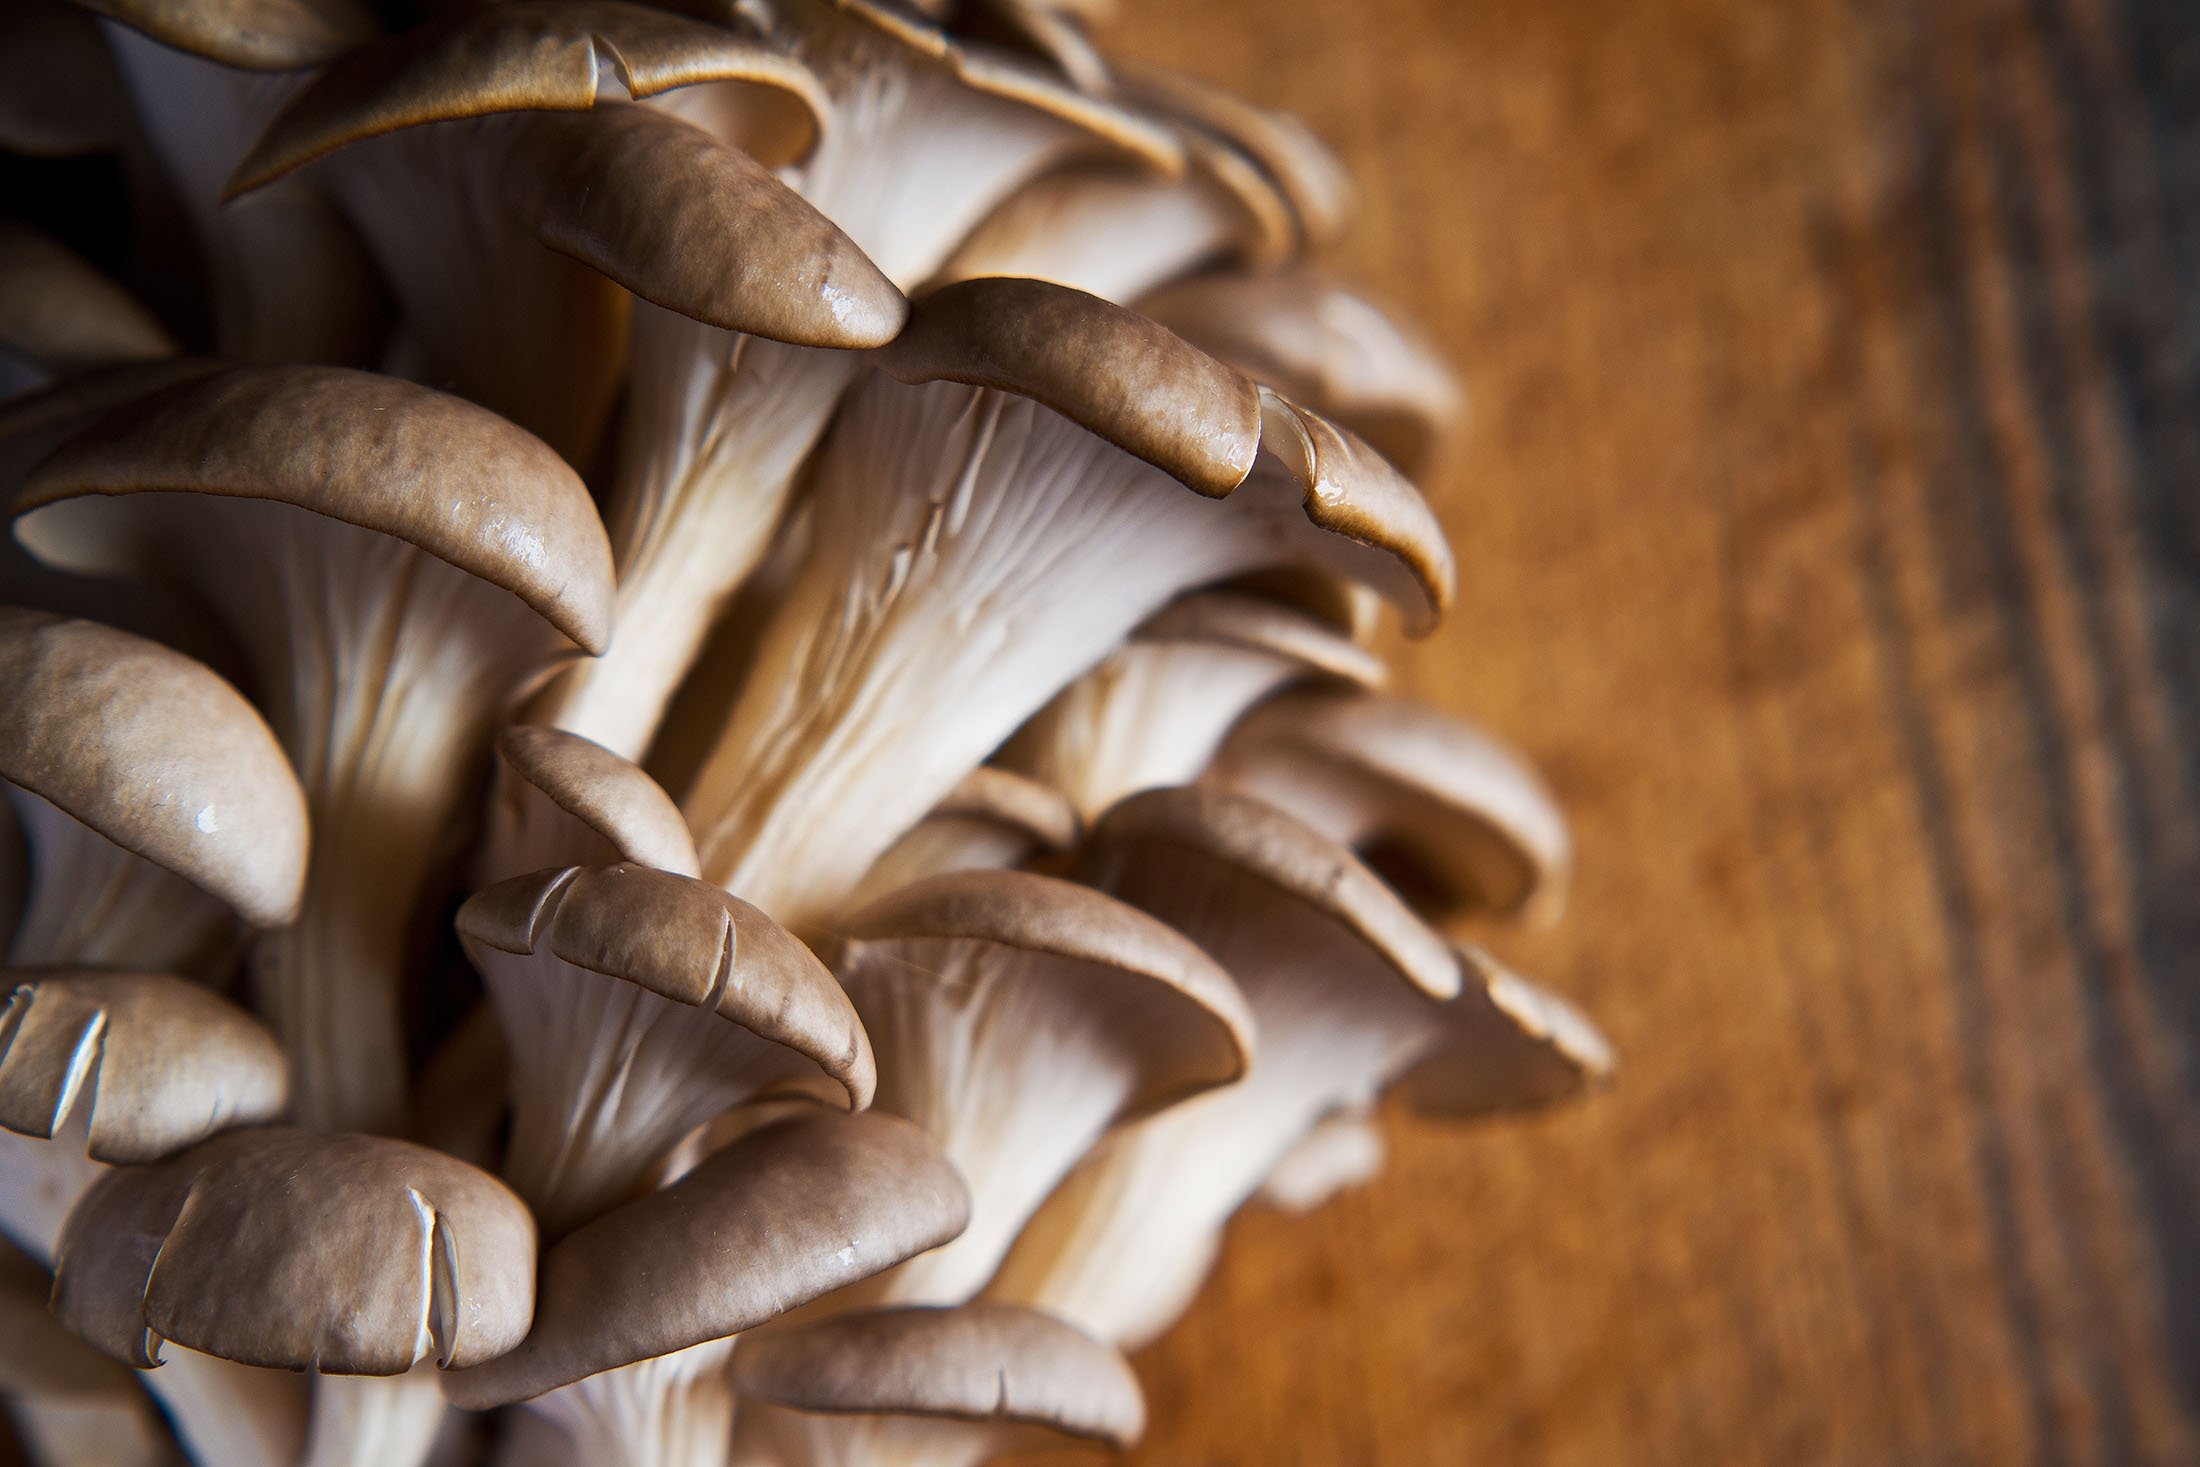 One of the most delicious types of mushrooms is the oyster mushrooms. (Shutterstock Photo)